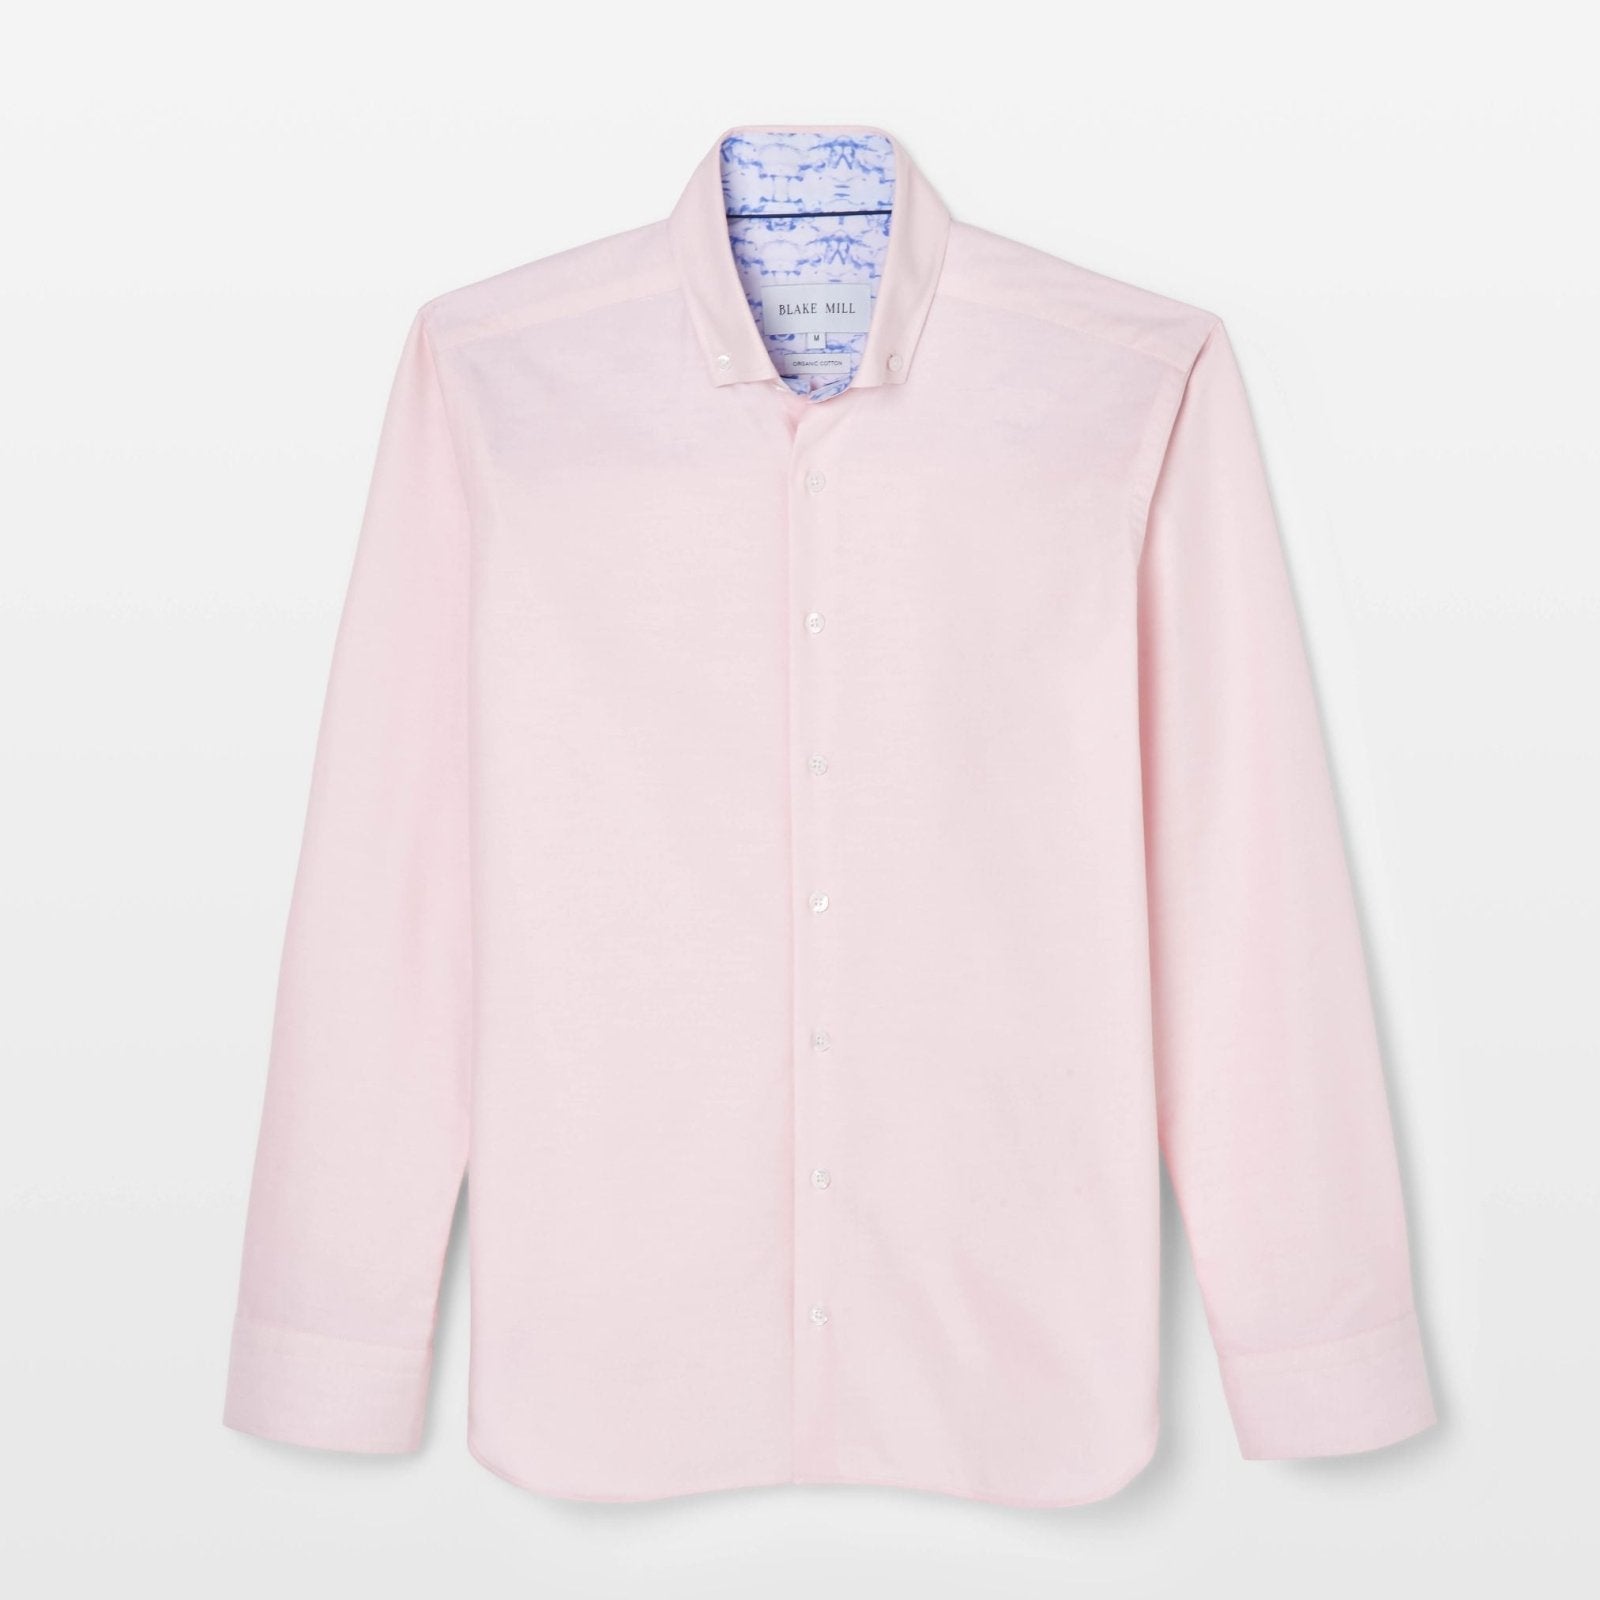 Pink Oxford with Know Your Mind Accents Button-Down Shirt - Blake Mill